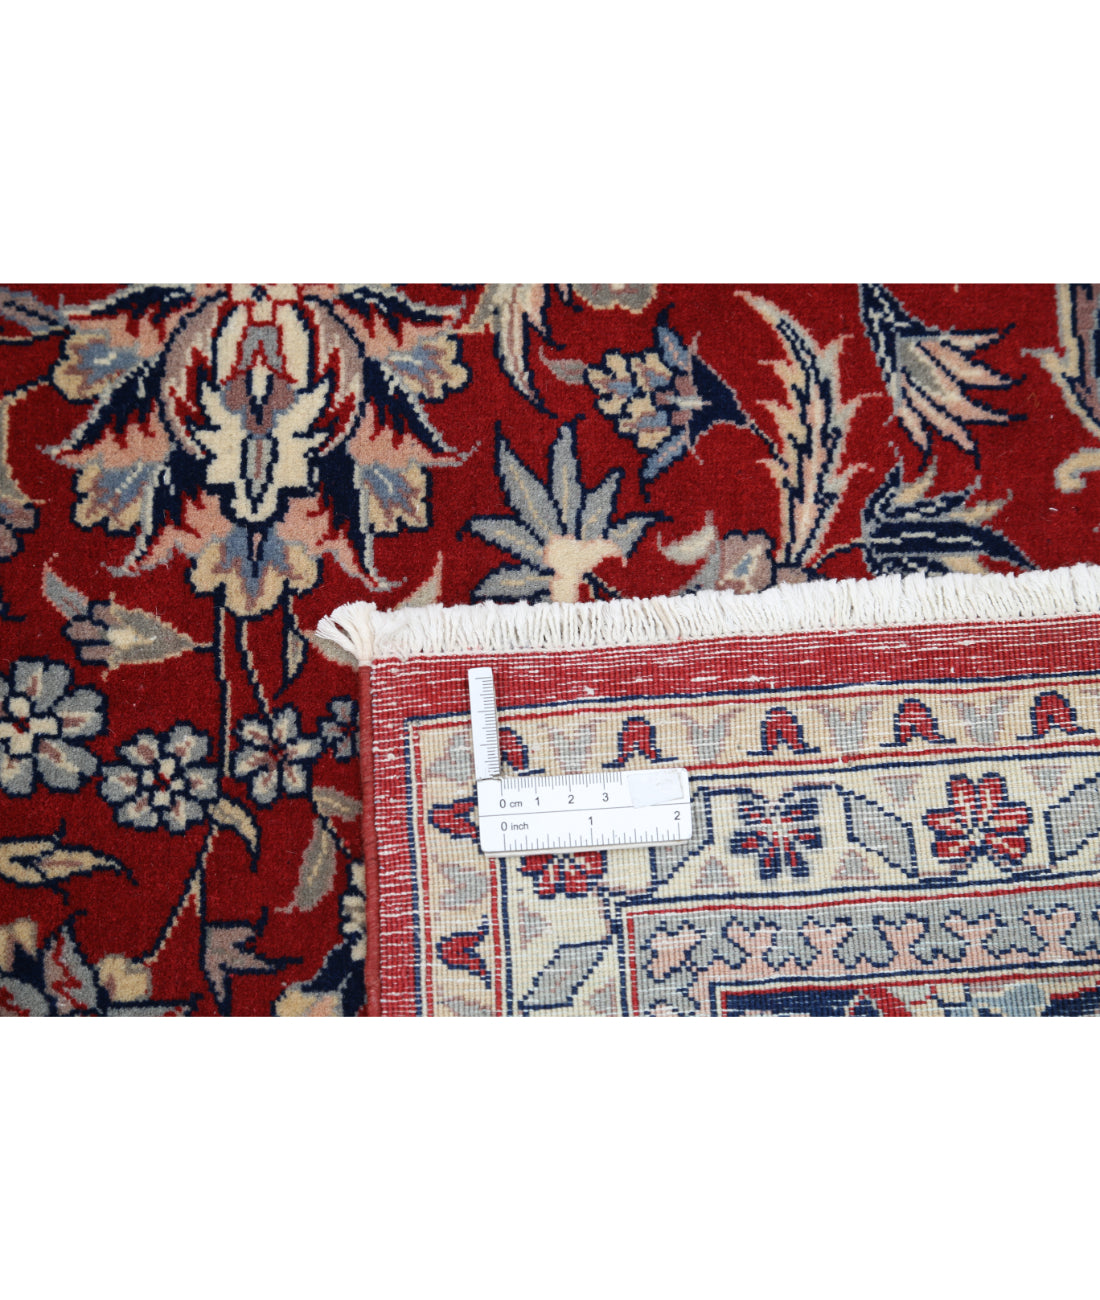 Heritage 6' 0" X 8' 11" Hand-Knotted Wool Rug 6' 0" X 8' 11" (183 X 272) / Red / Blue